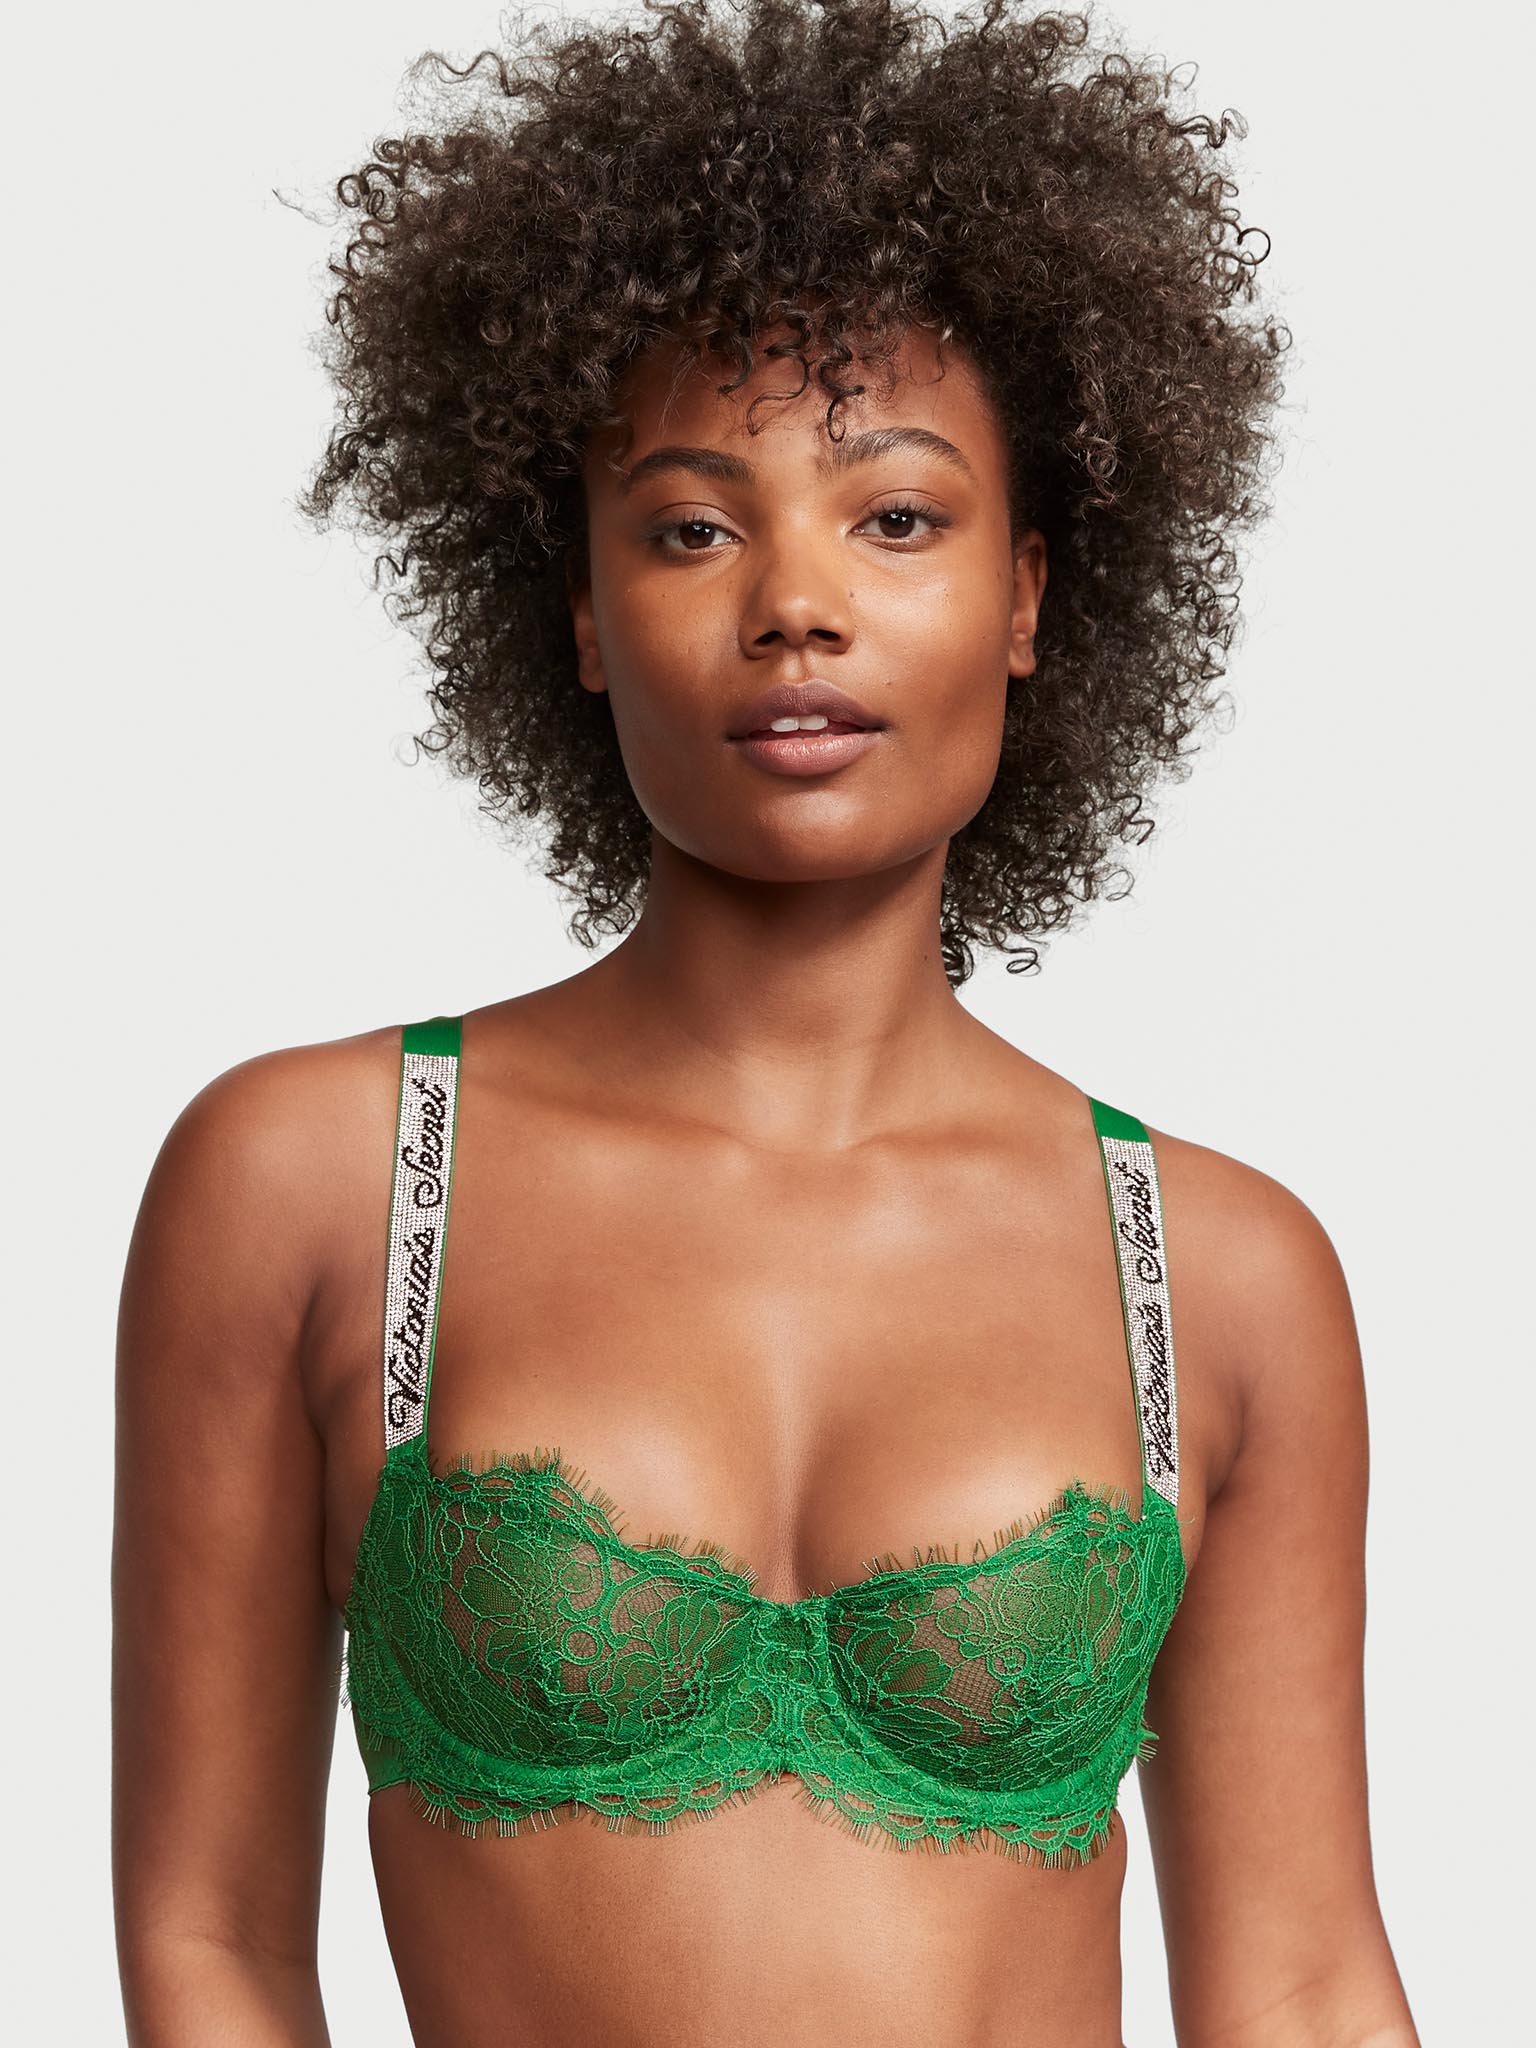 Buy Very Sexy Wicked Unlined Lace Shine Strap Balconette Bra